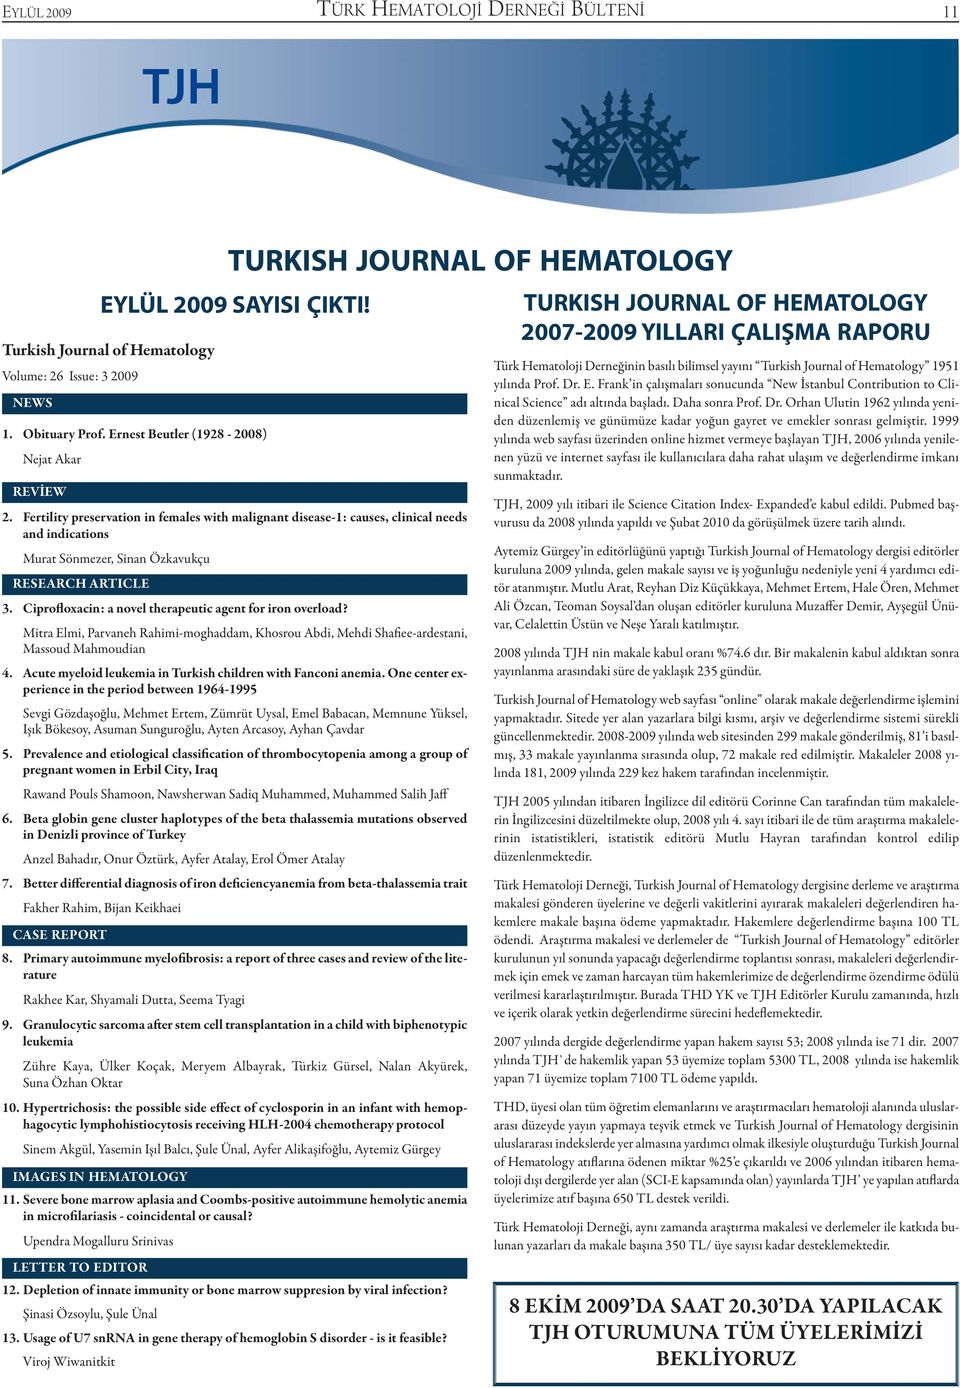 Fertility preservation in females with malignant disease-1: causes, clinical needs and indications Murat Sönmezer, Sinan Özkavukçu RESEARCH ARTICLE 3.